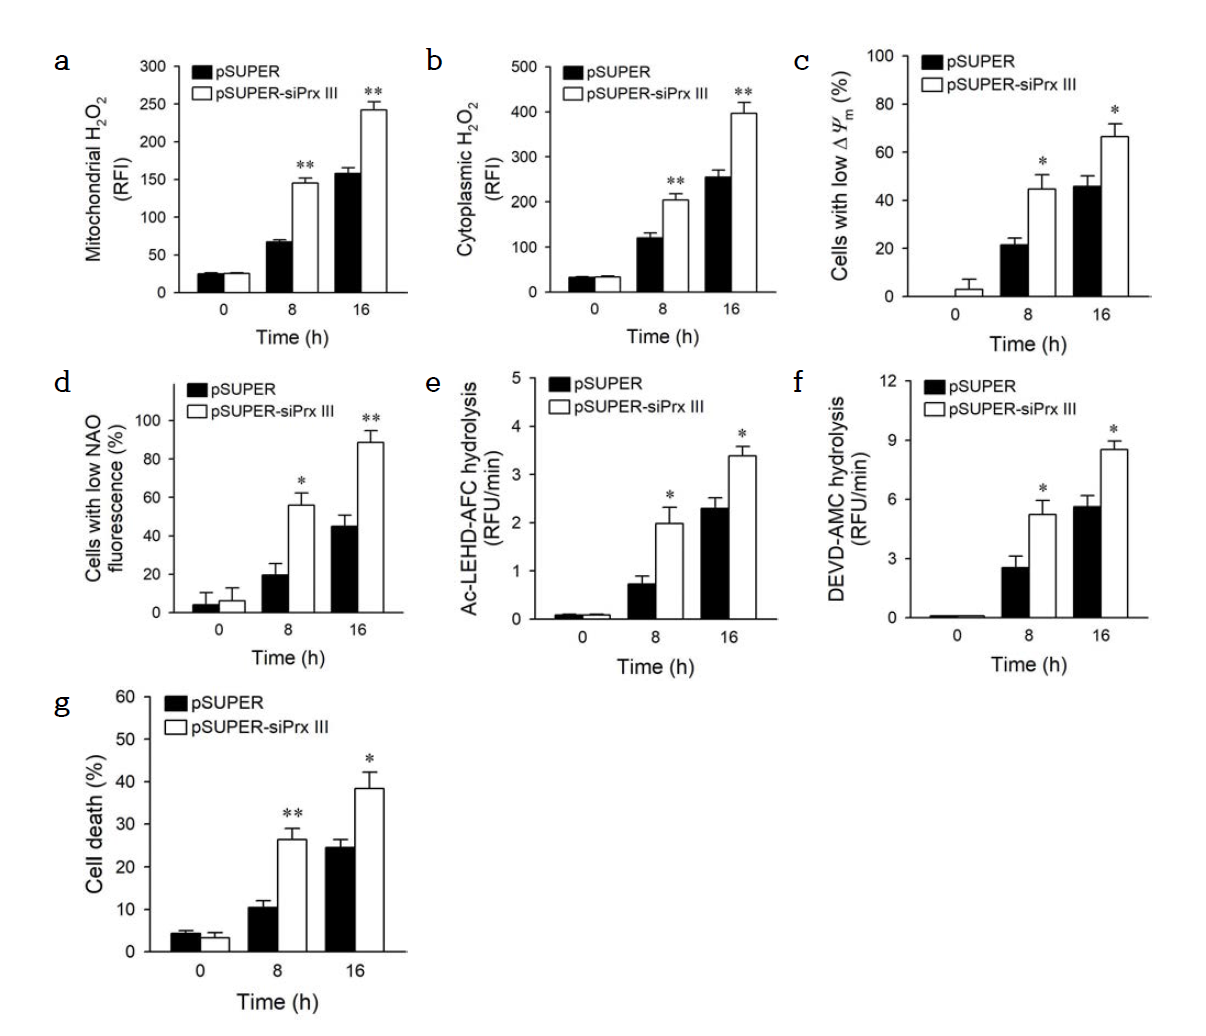 Prx III knockdown promotes diclofenac-induced apoptosis in HepG2 cells through mitochondrial H2O2-mediated pathway. Control (pSUPER) and Prx III knockdown (pSUPER-siPrx III) HepG2 cells were cultured with 0.4 mM diclofenac for the indicated times. (a and b) The cells were stained with MitoPY-1 (a) or PO-1 (b). The fluorescence images were obtained and quantified at five regions randomly selected on each dish. Quantitative levels of mitochondrial (a) and cytoplasmic (b) H2O2 are shown as mean ± SEM (n = 3) of RFI. (c and d) The cells were stained with TMRE (c) or NAO (d) and analyzed by flow cytometry. Data are expressed as means ± SEM of the percentage of cells with low ΔΨm fluorescence (c) and with low NAO fluorescence (n = 3). (e and f) The activity of caspase-9 (e) and caspase-3 (f) was measured using peptide conjugated to fluorophores. Data are expressed as means ± SEM of the RFU per min (n = 3). (g) After staining with FITC-conjugated annexin V and PI, cells were analyzed by flow cytometry. Annexin V and PI double-negative cells were considered as viable cells. Cell death was measured as the percentage of annexin V- or PI-positive cells. Data are expressed as means ± SEM (n = 3). *, p < 0.05; **, p < 0.01 compared to pSUPER. MitoPY-1, mito peroxy yellow-1; NAO, 10-N-nonyl-acridine orange; P I , propidium iodide; PO-1, peroxyorange-1; P rx, peroxiredoxin; RFI , relative fluorescence intensity; RFU, relative fluorescence unit; TMRE, tetramethylrhodamine ethyl ester